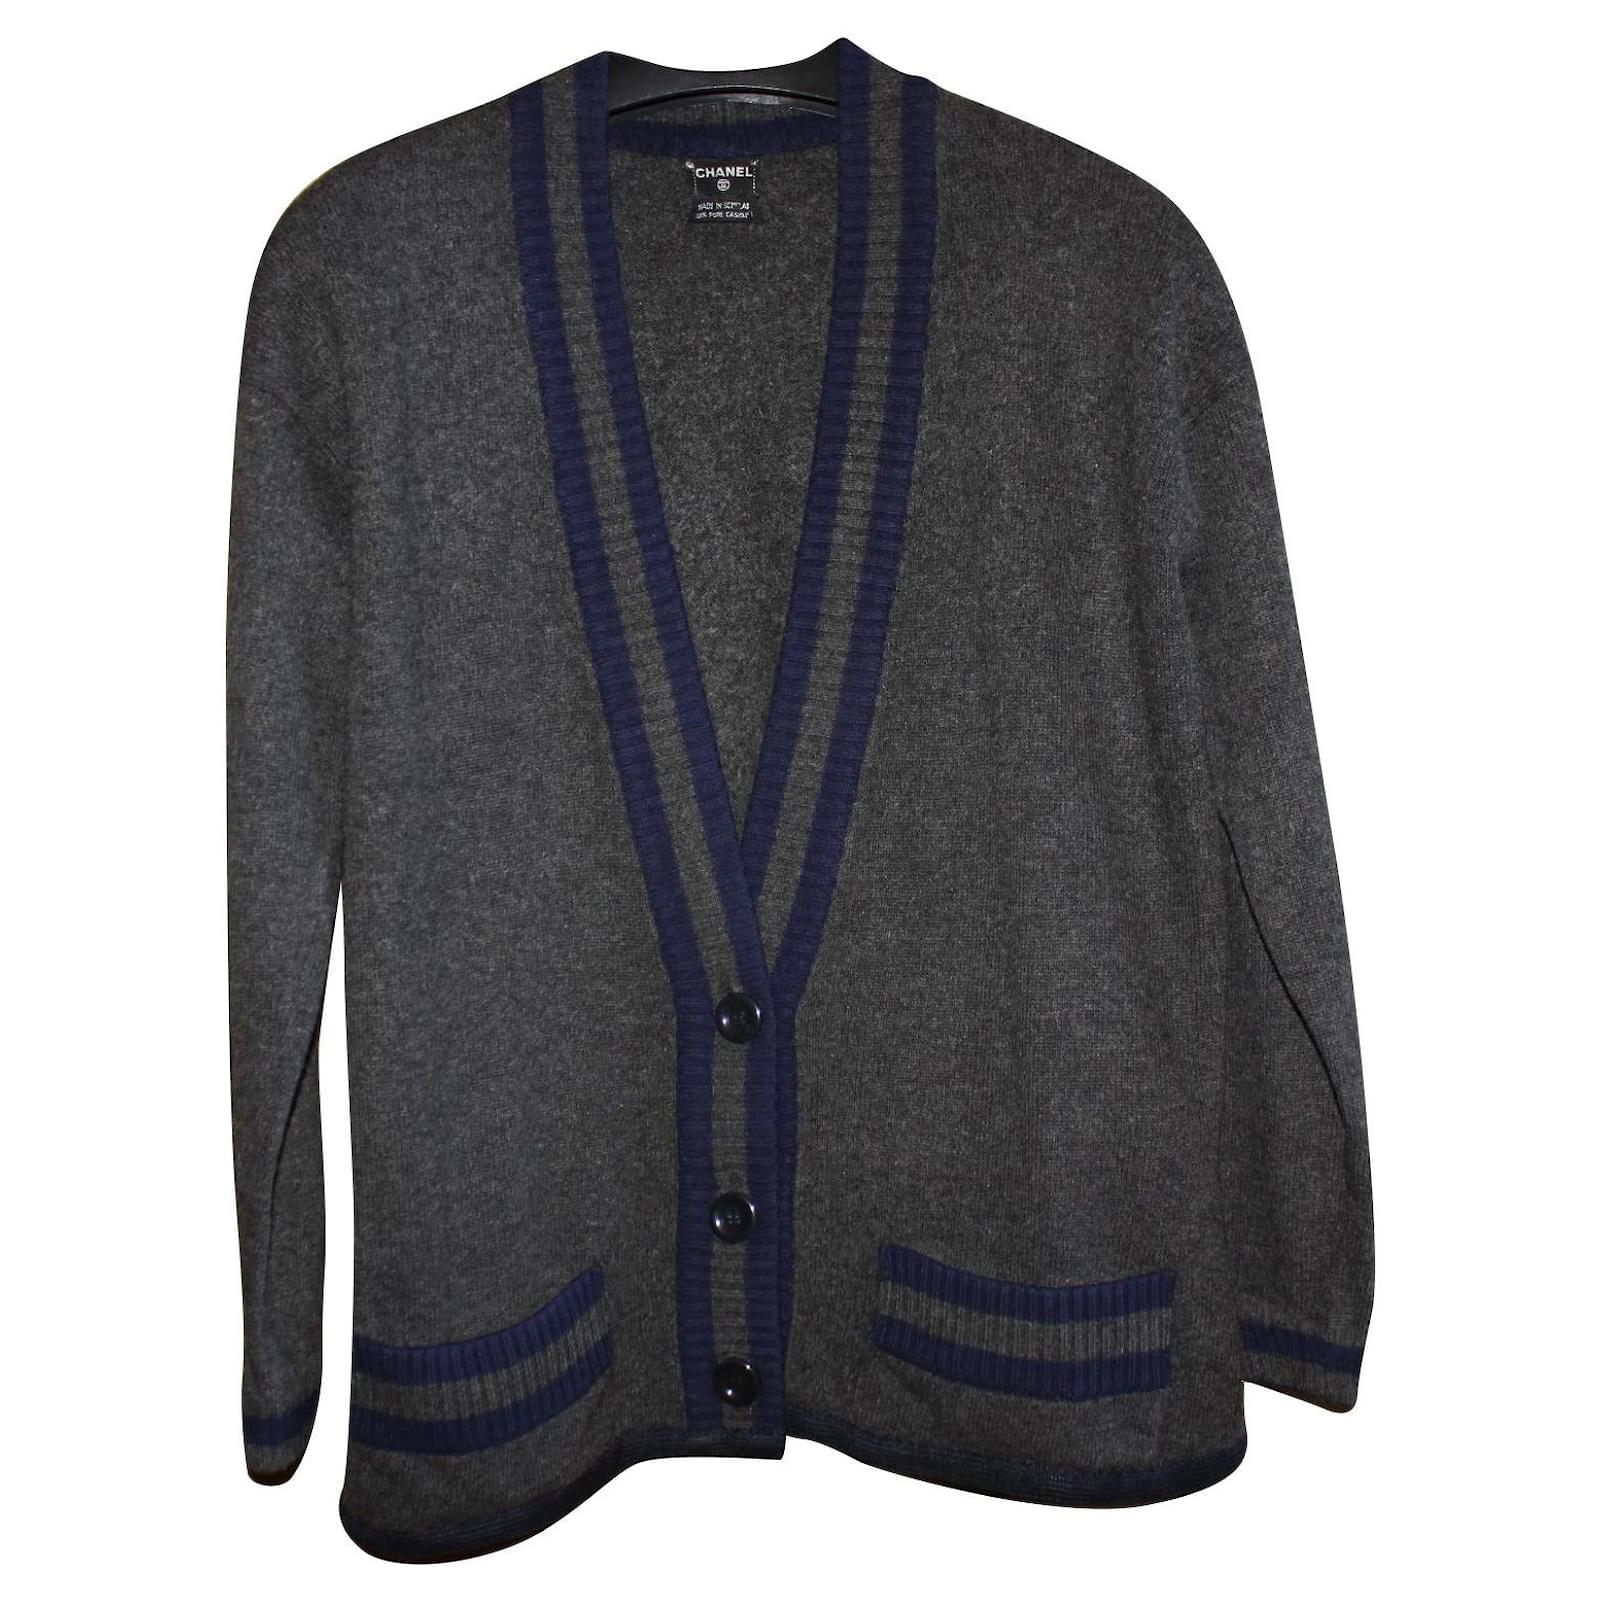 Vintage cashmere cardigan from Chanel